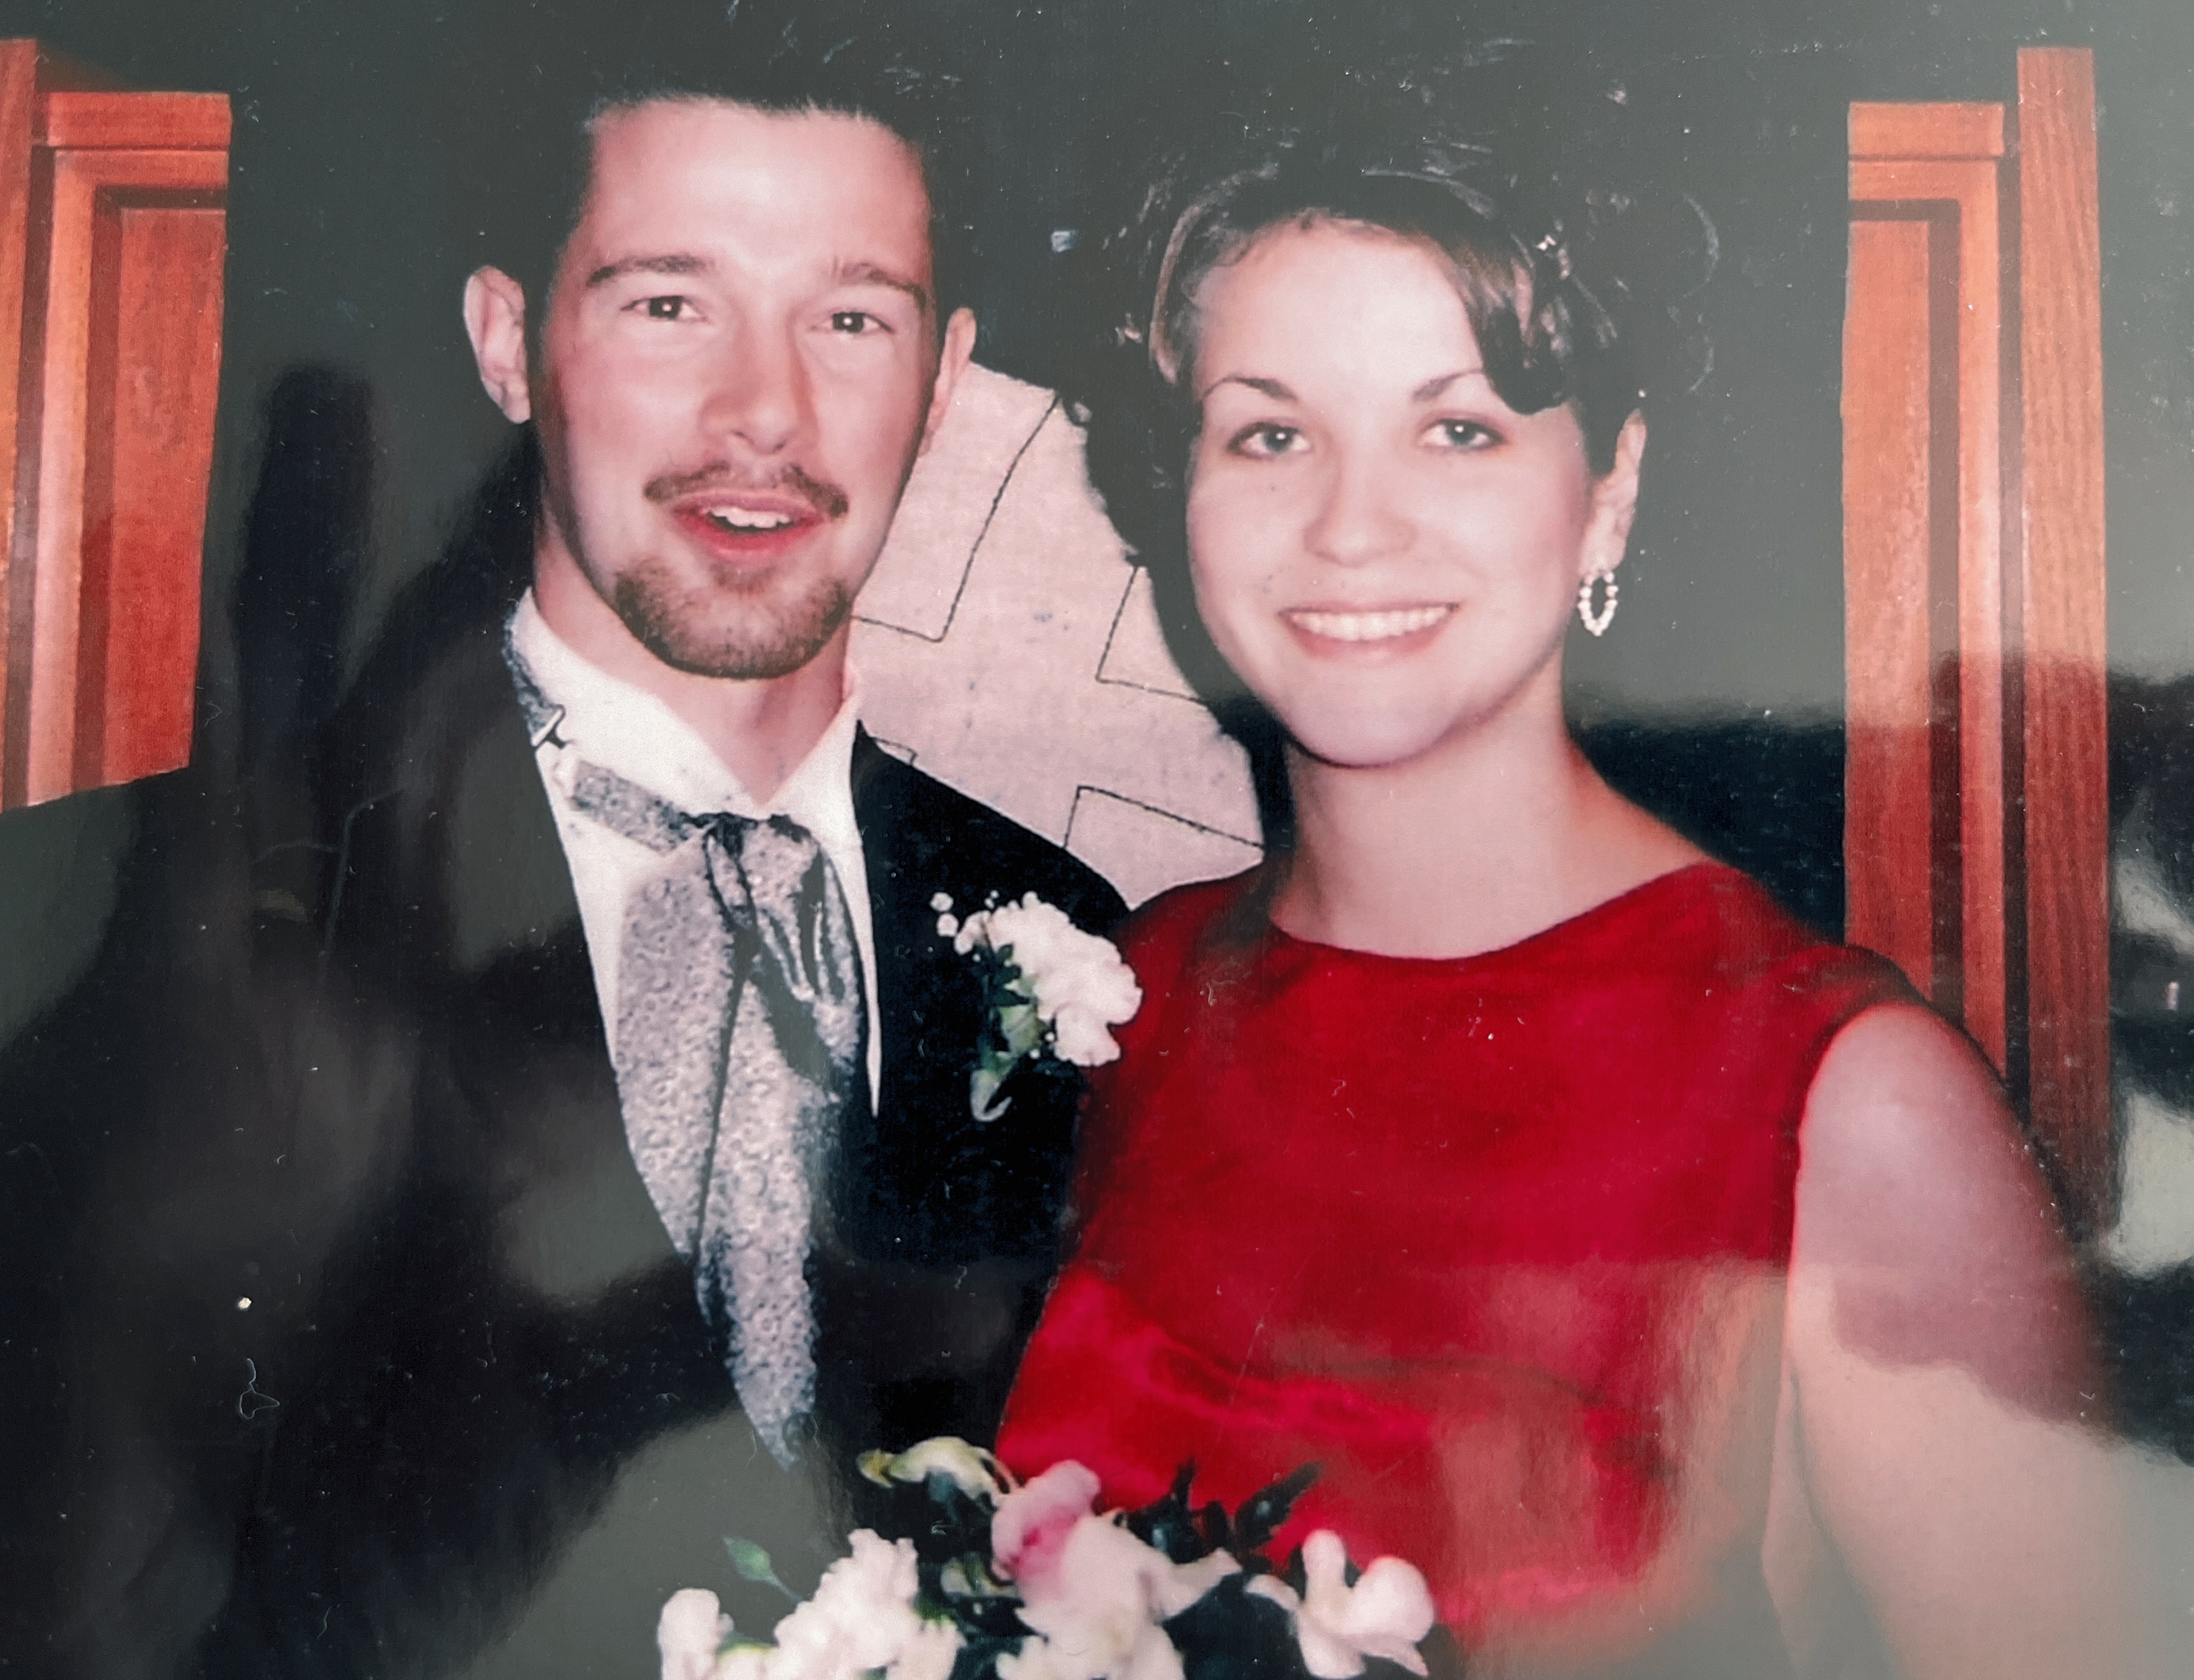 Kimberly and Bryce Hartnell 2002 or 2003 attending a friend’s wedding. Kim was maid of honour.